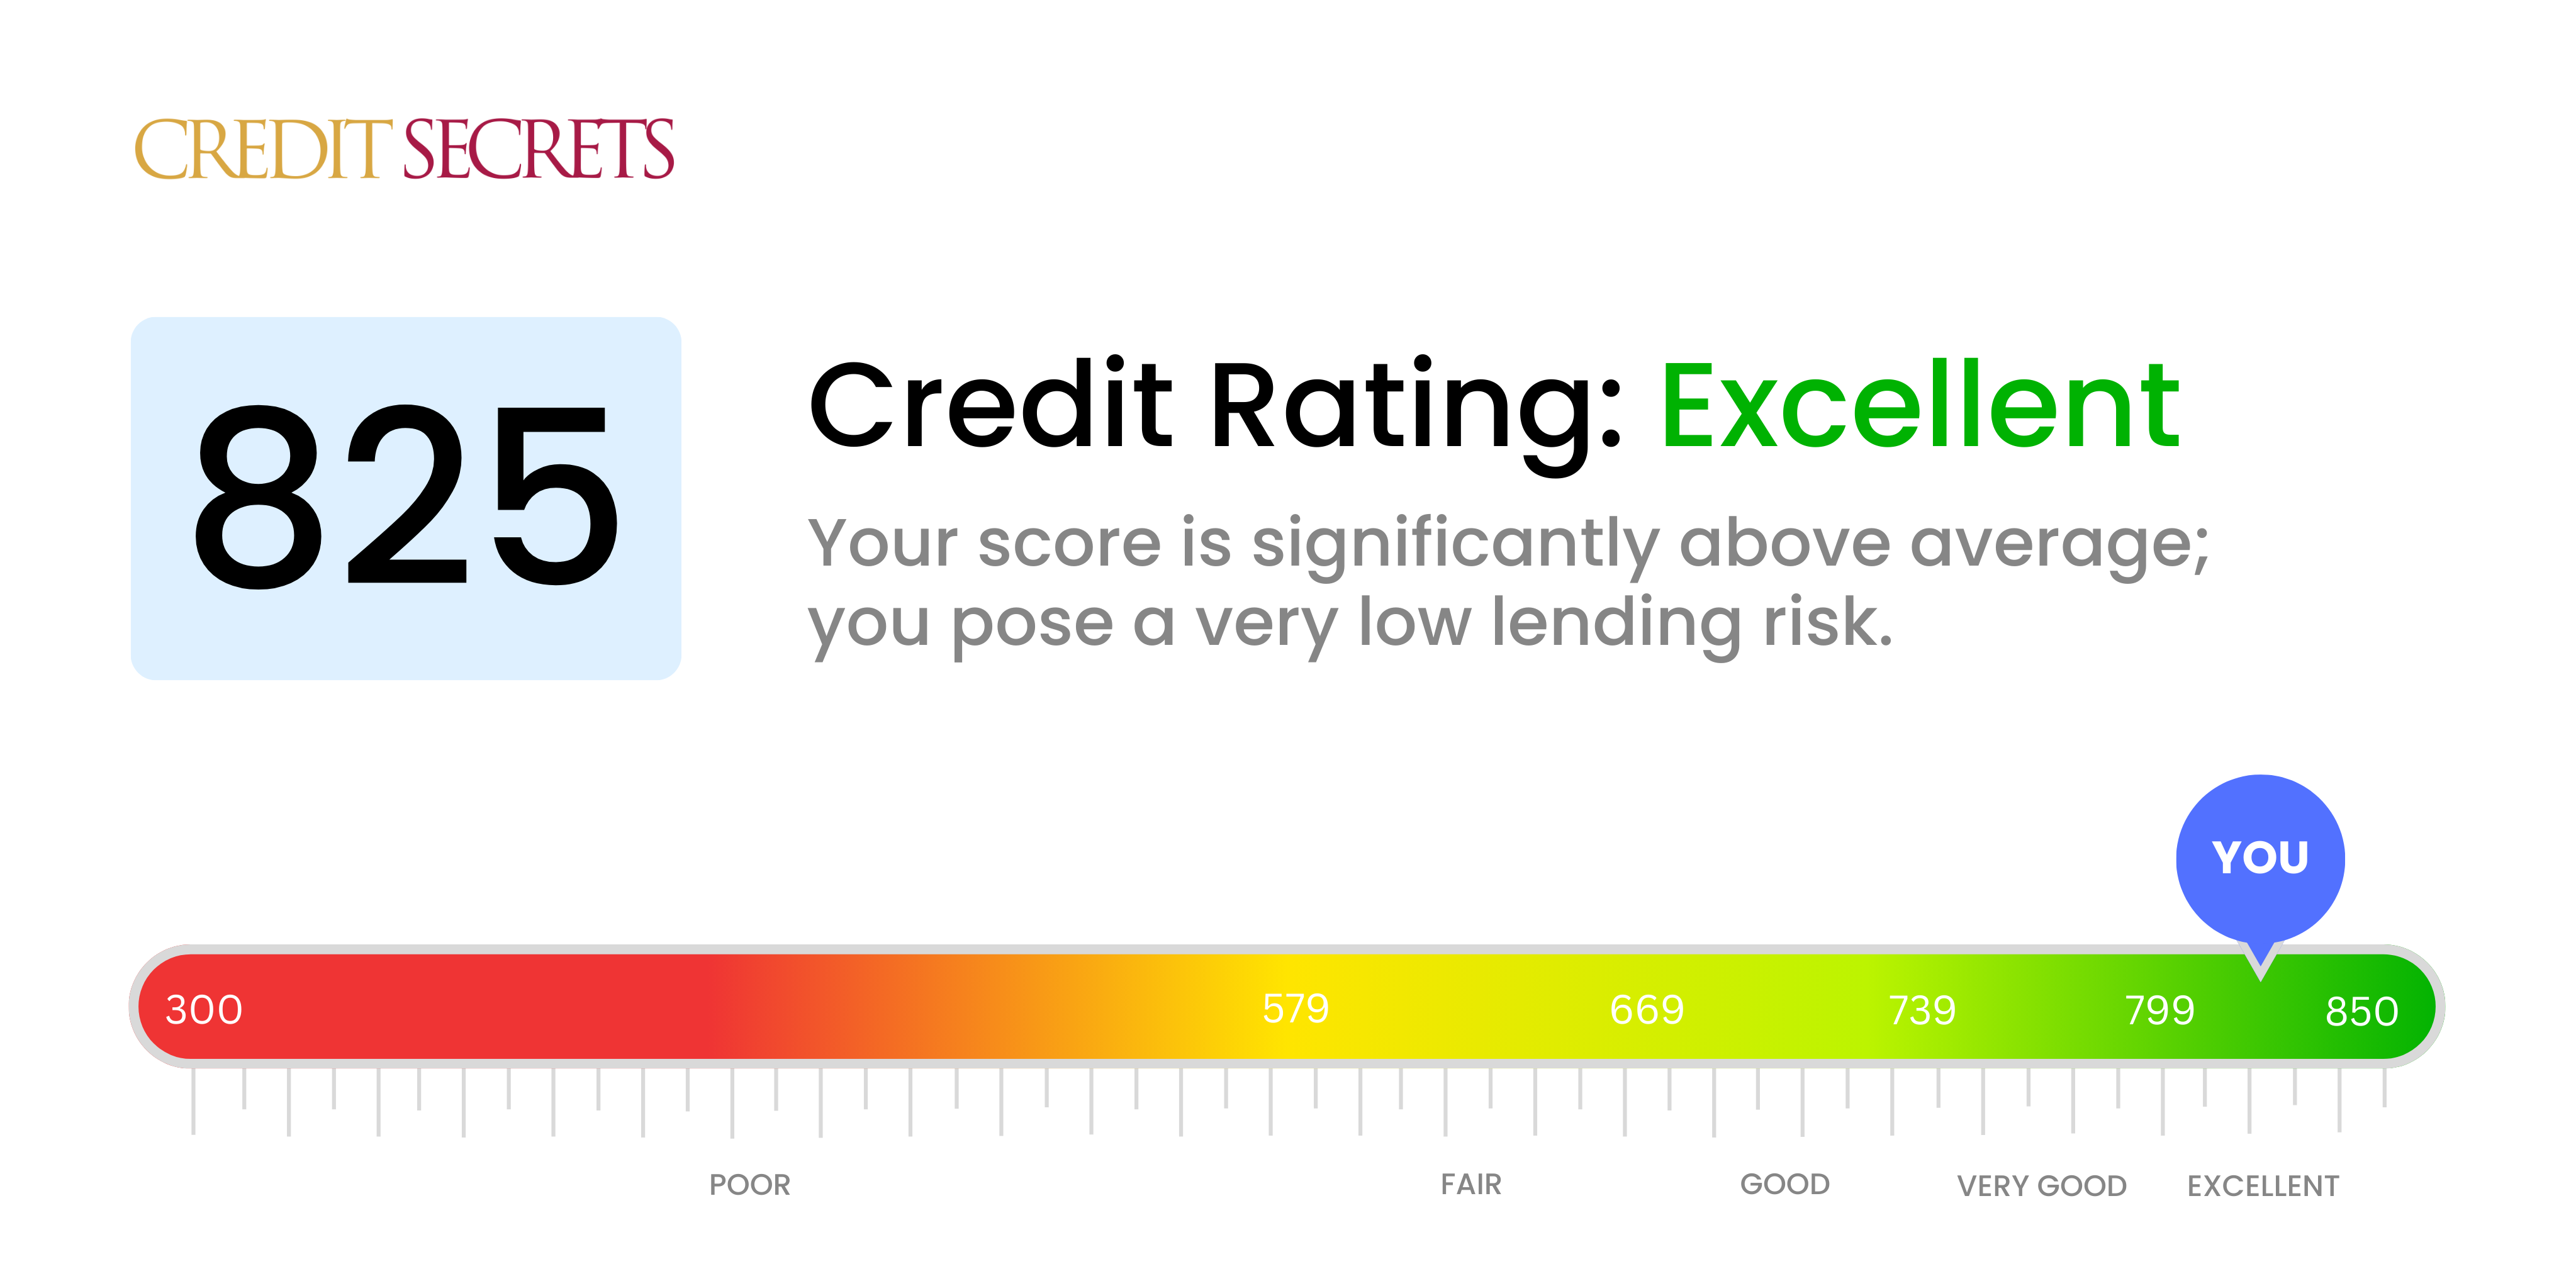 Is 825 a good credit score?